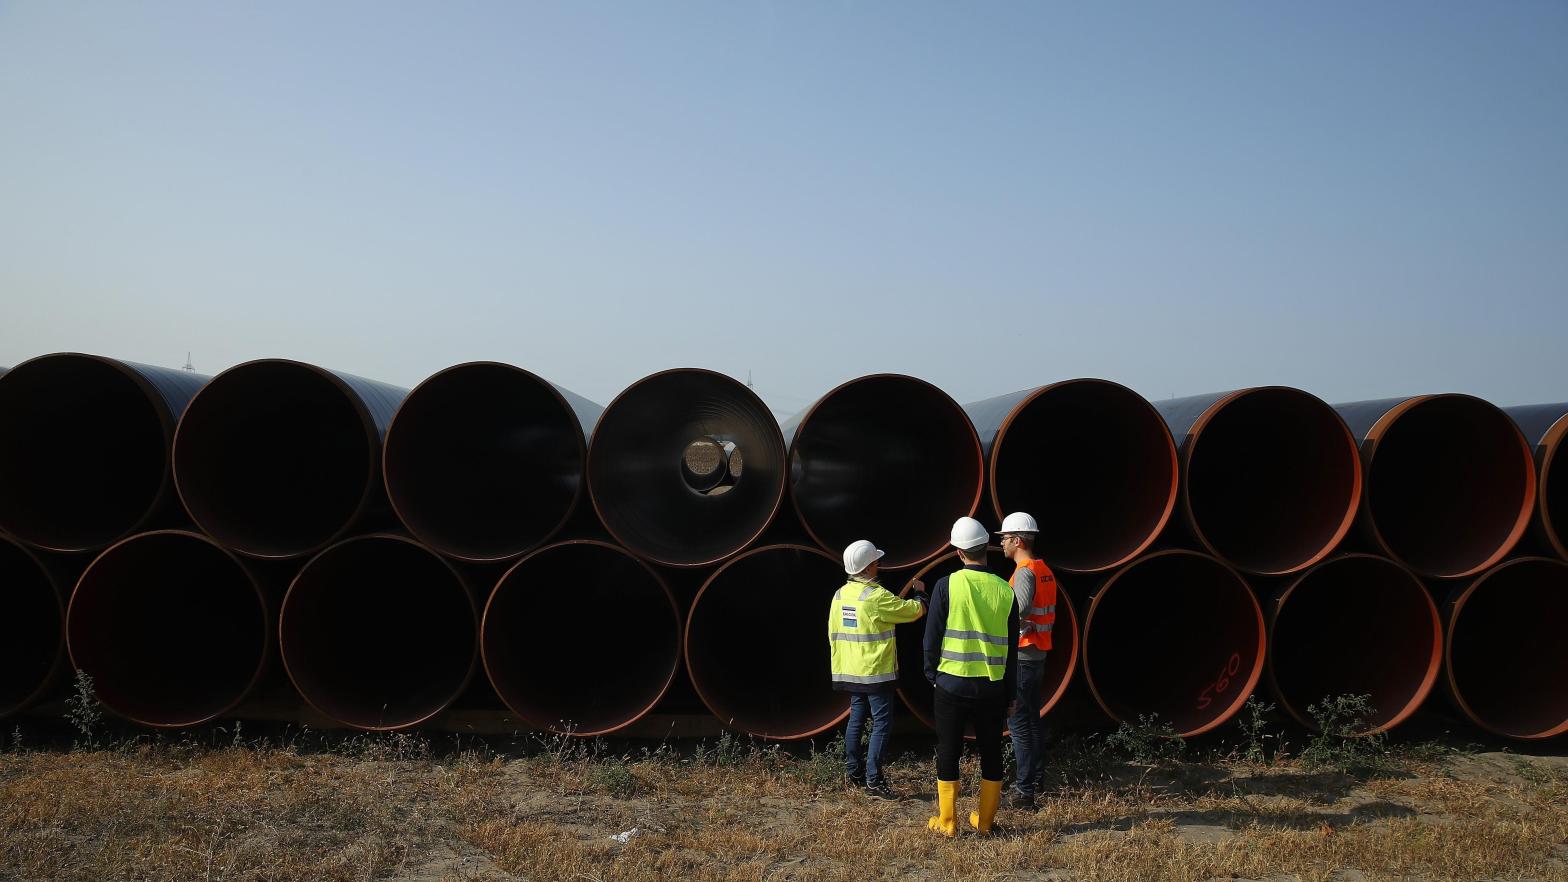 Workers stand in front of stacked pipes for a natural gas pipeline. (Photo: Sean Gallup, Getty Images)